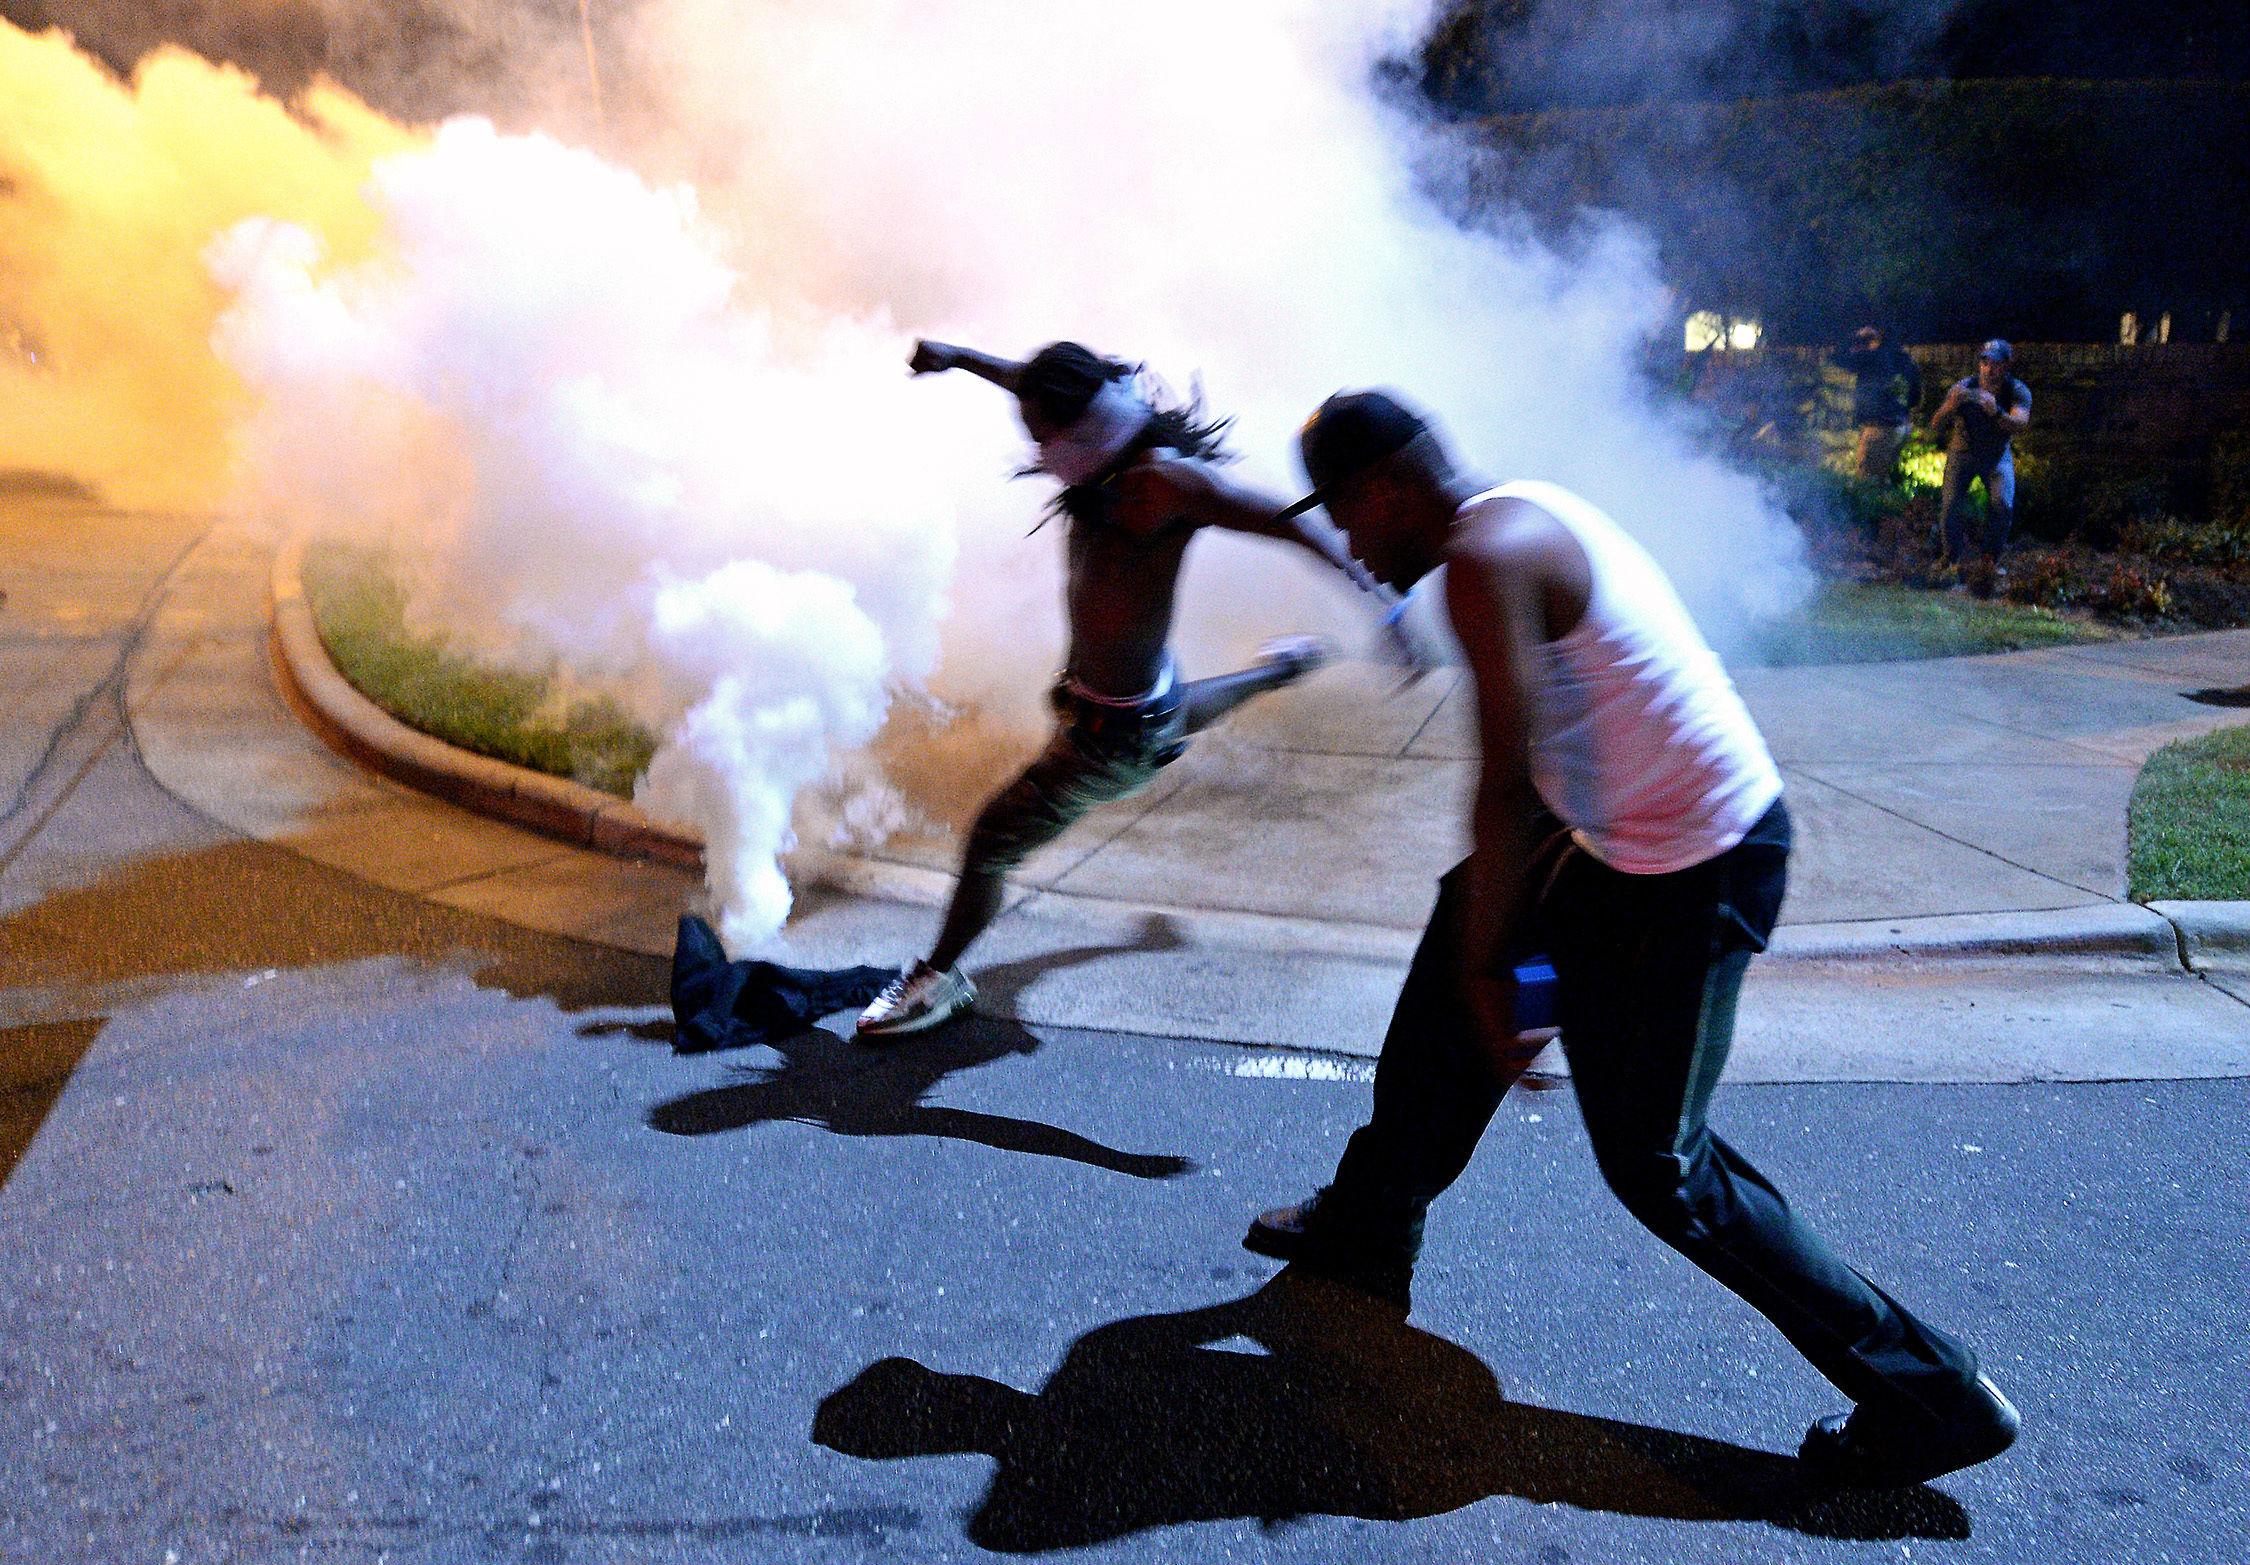 Police used tear gas to disperse protesters